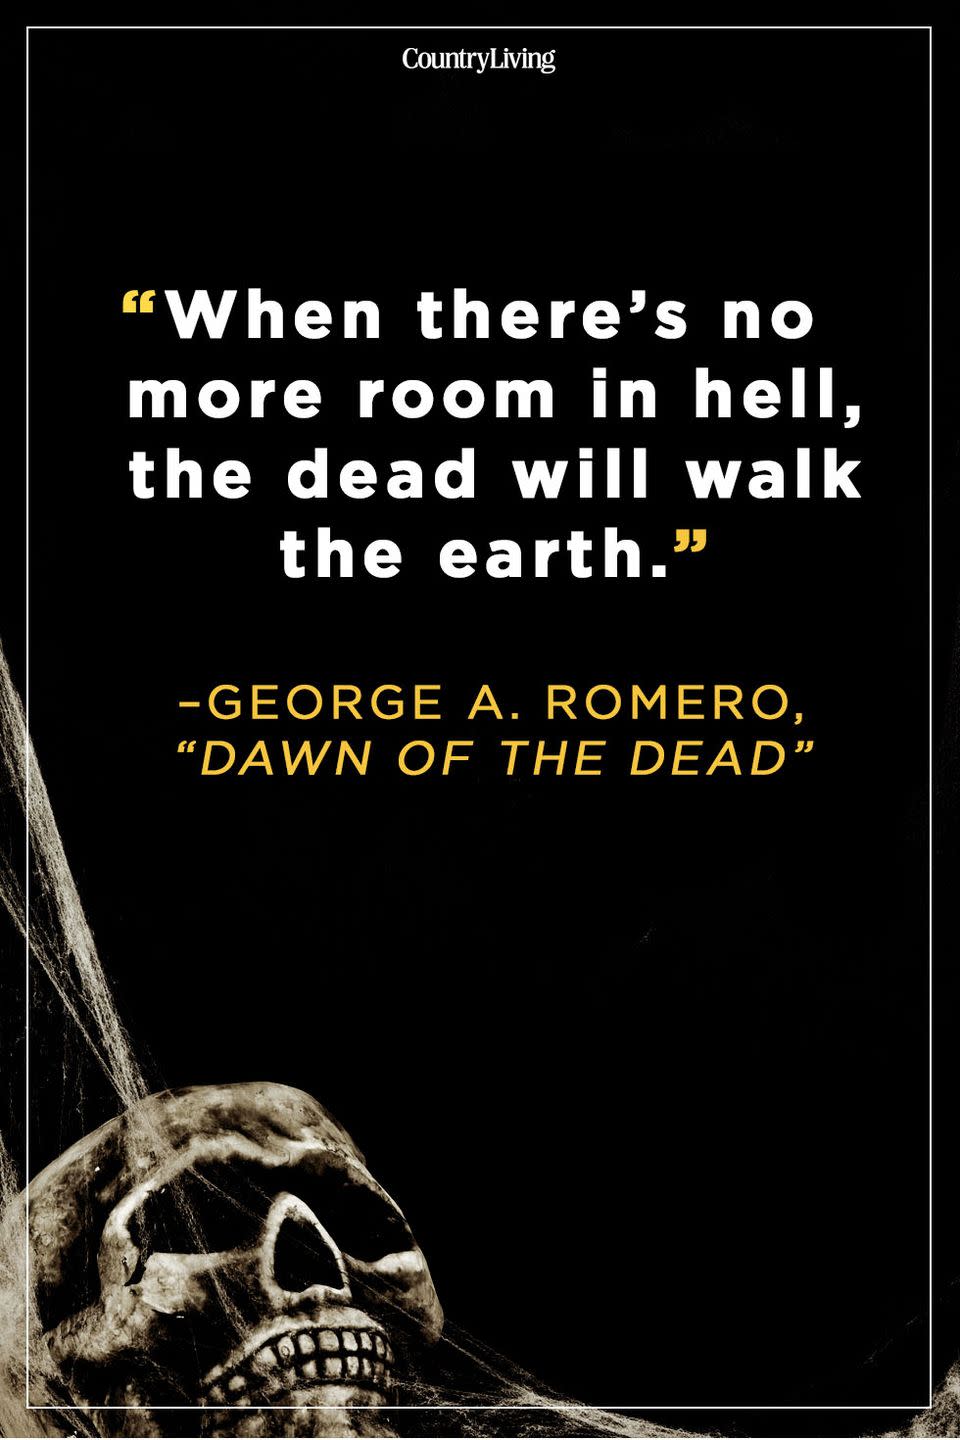 <p>“When there’s no more room in hell, the dead will walk the earth.”</p>